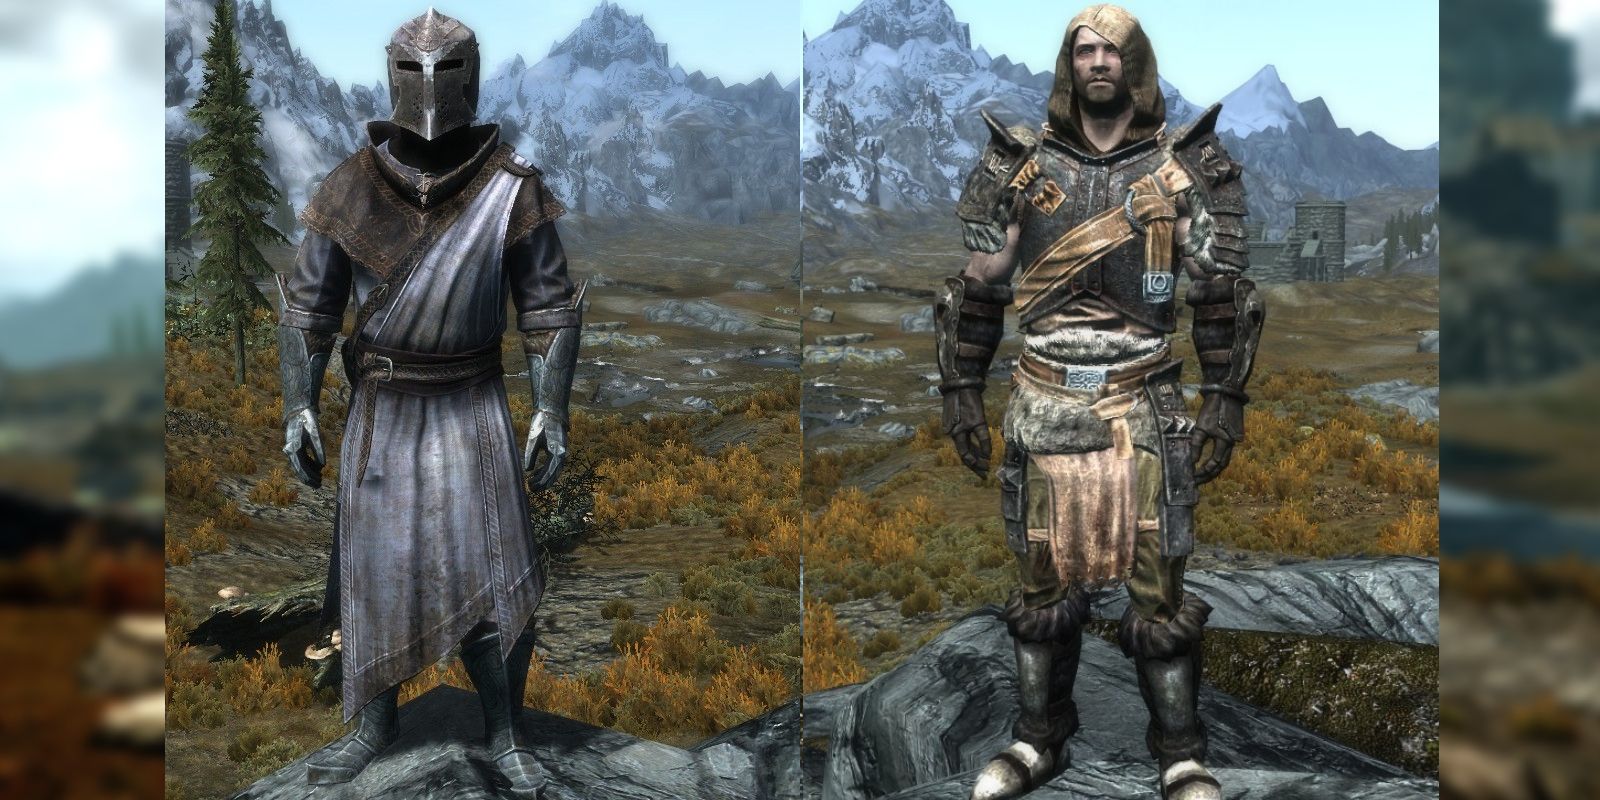 Skyrim's Most Perfect Armor Combos That Look Meant To Match Battle Mage College Of Winterhold